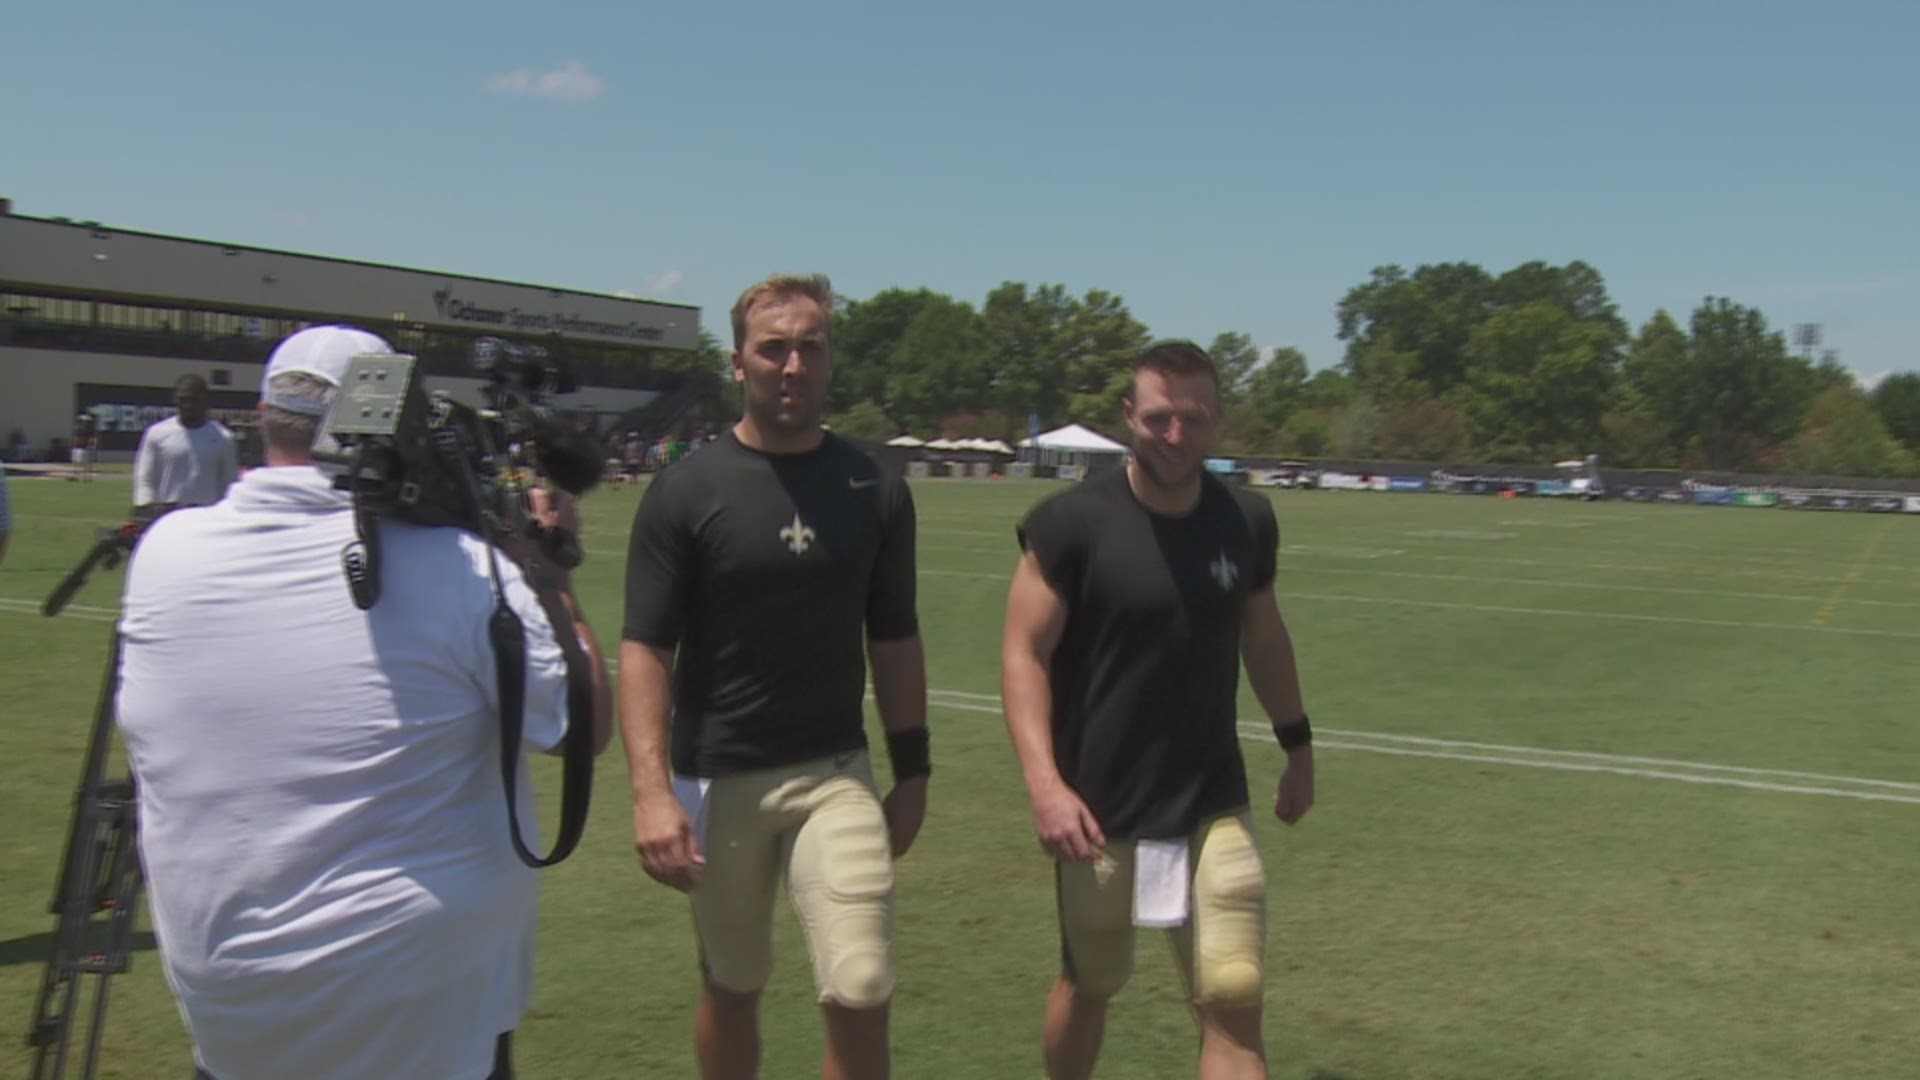 oudreaux Athletics of Opelousas has provided the ultimate cold spot for the New Orleans Saints during the rigors of 90-degree heat and high humidity at training camp.